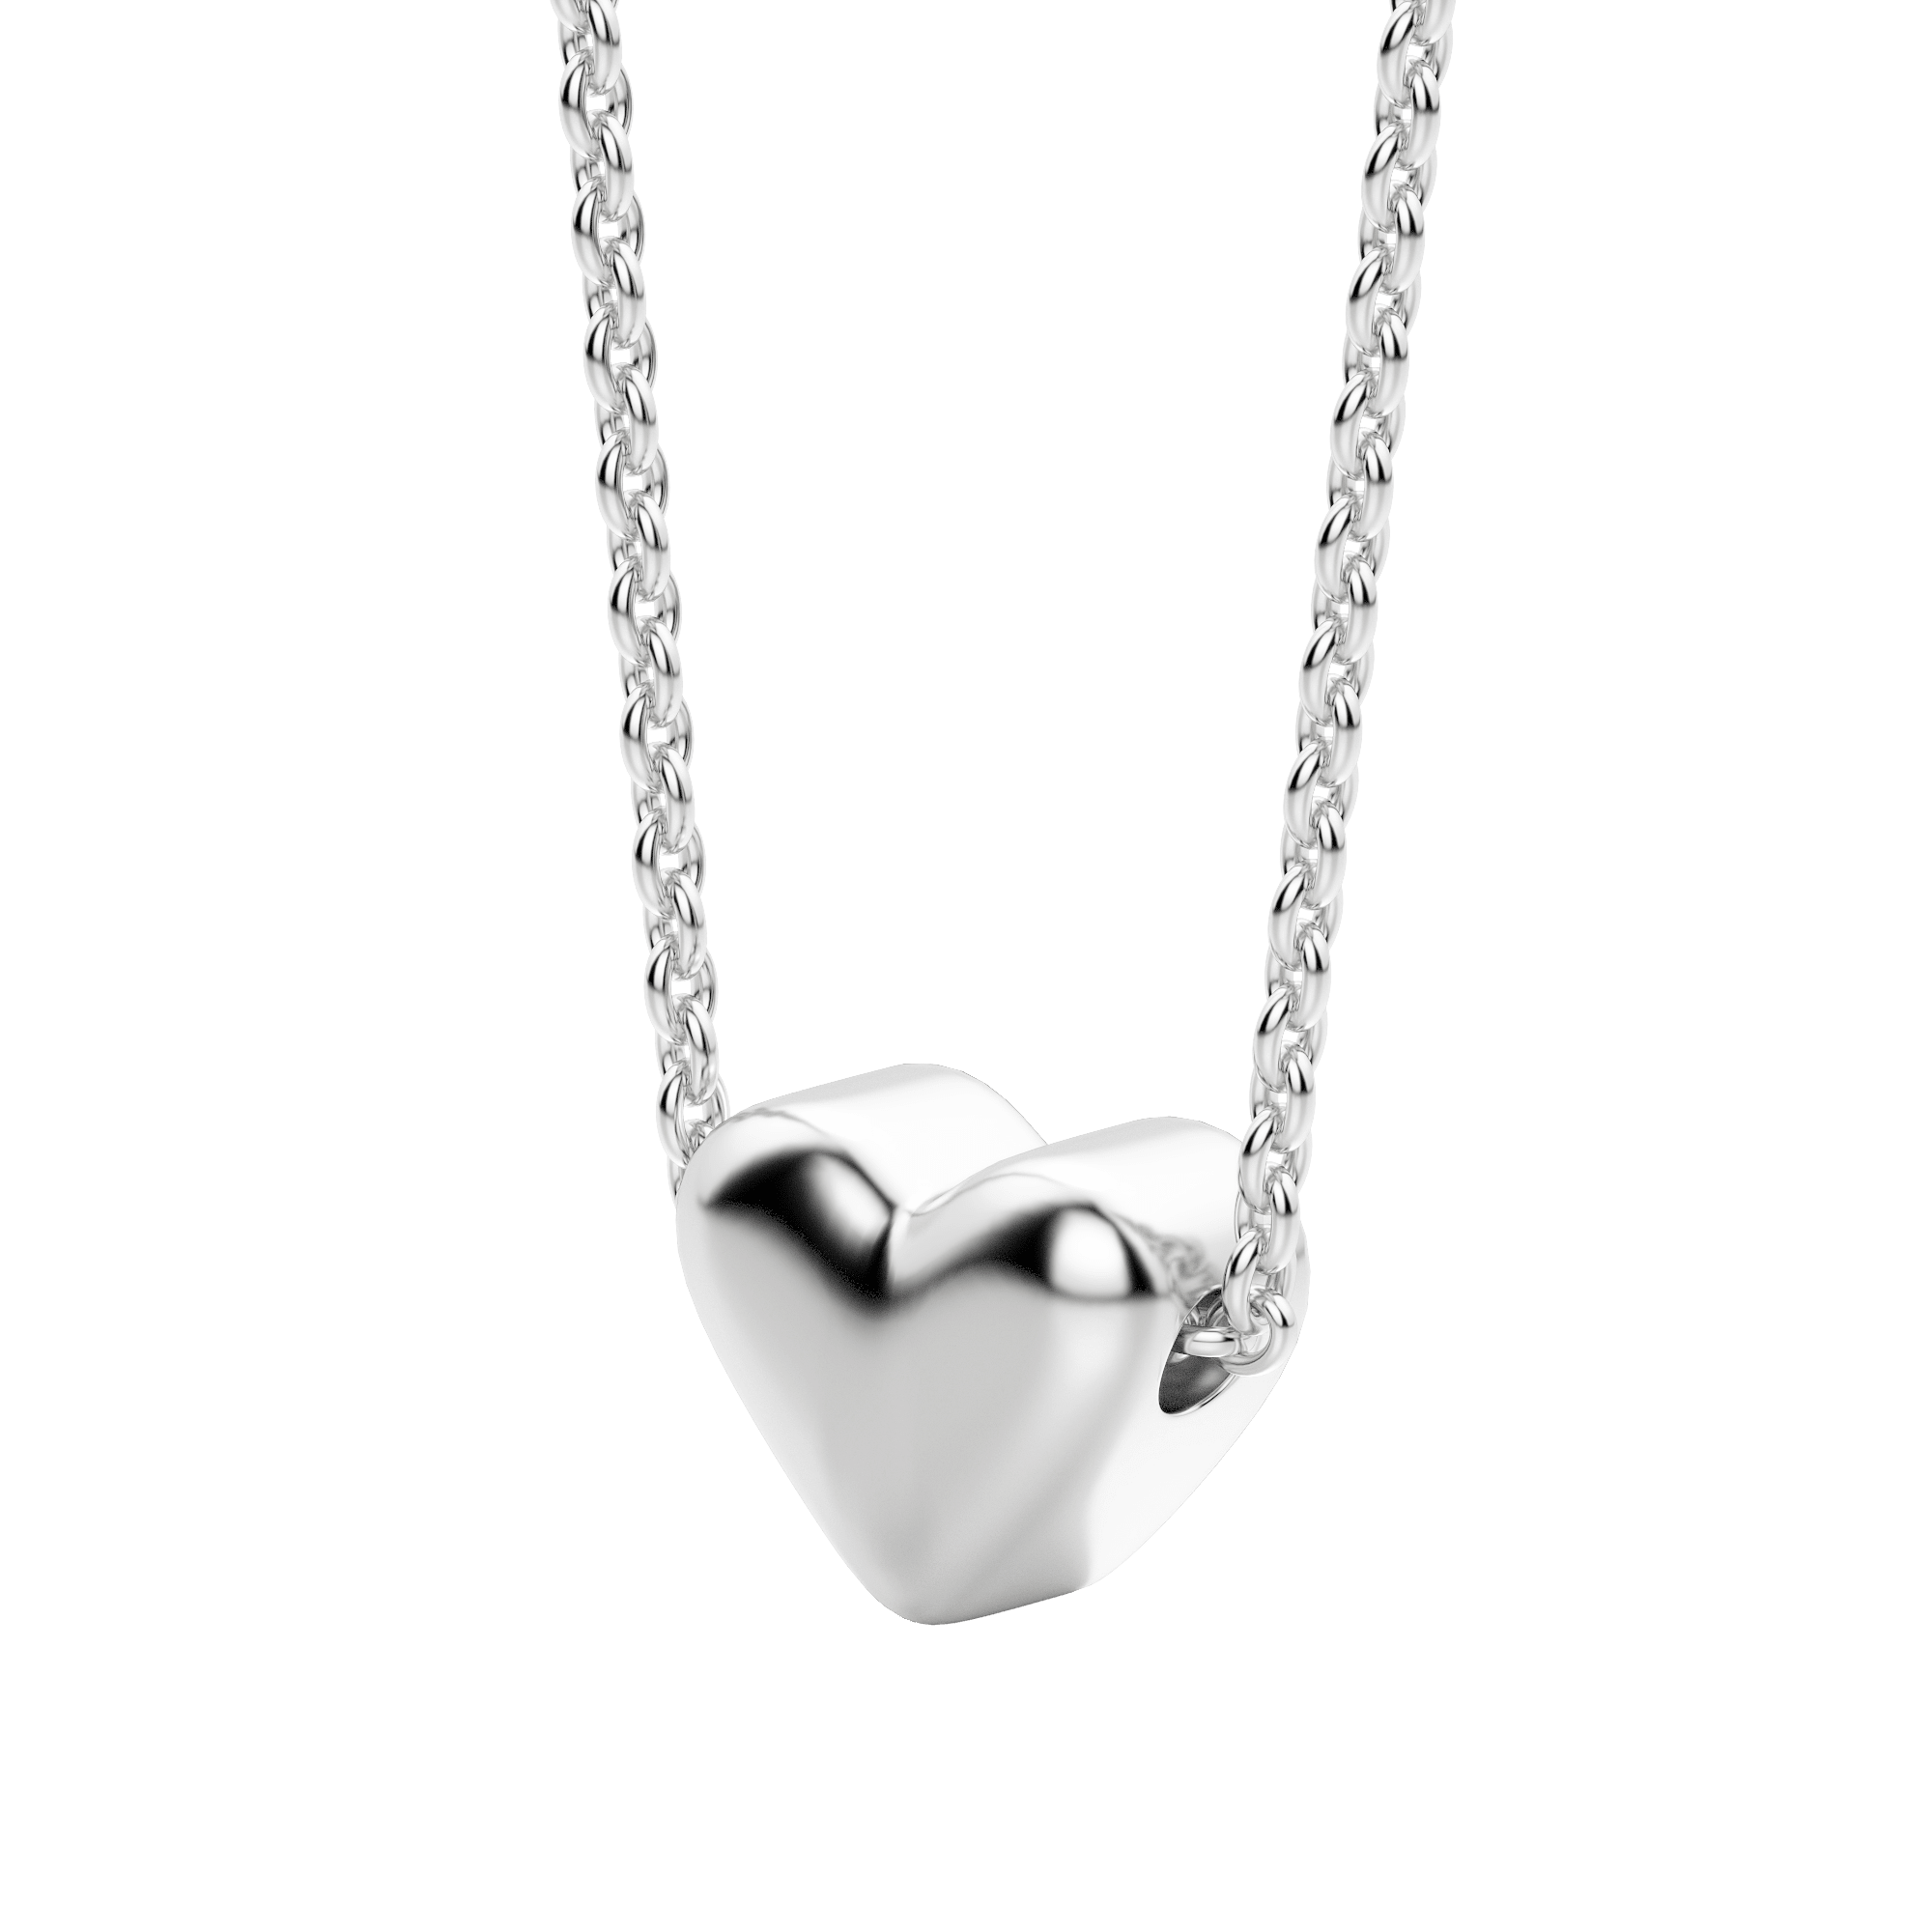 Silver Heart Necklace, Hover, 